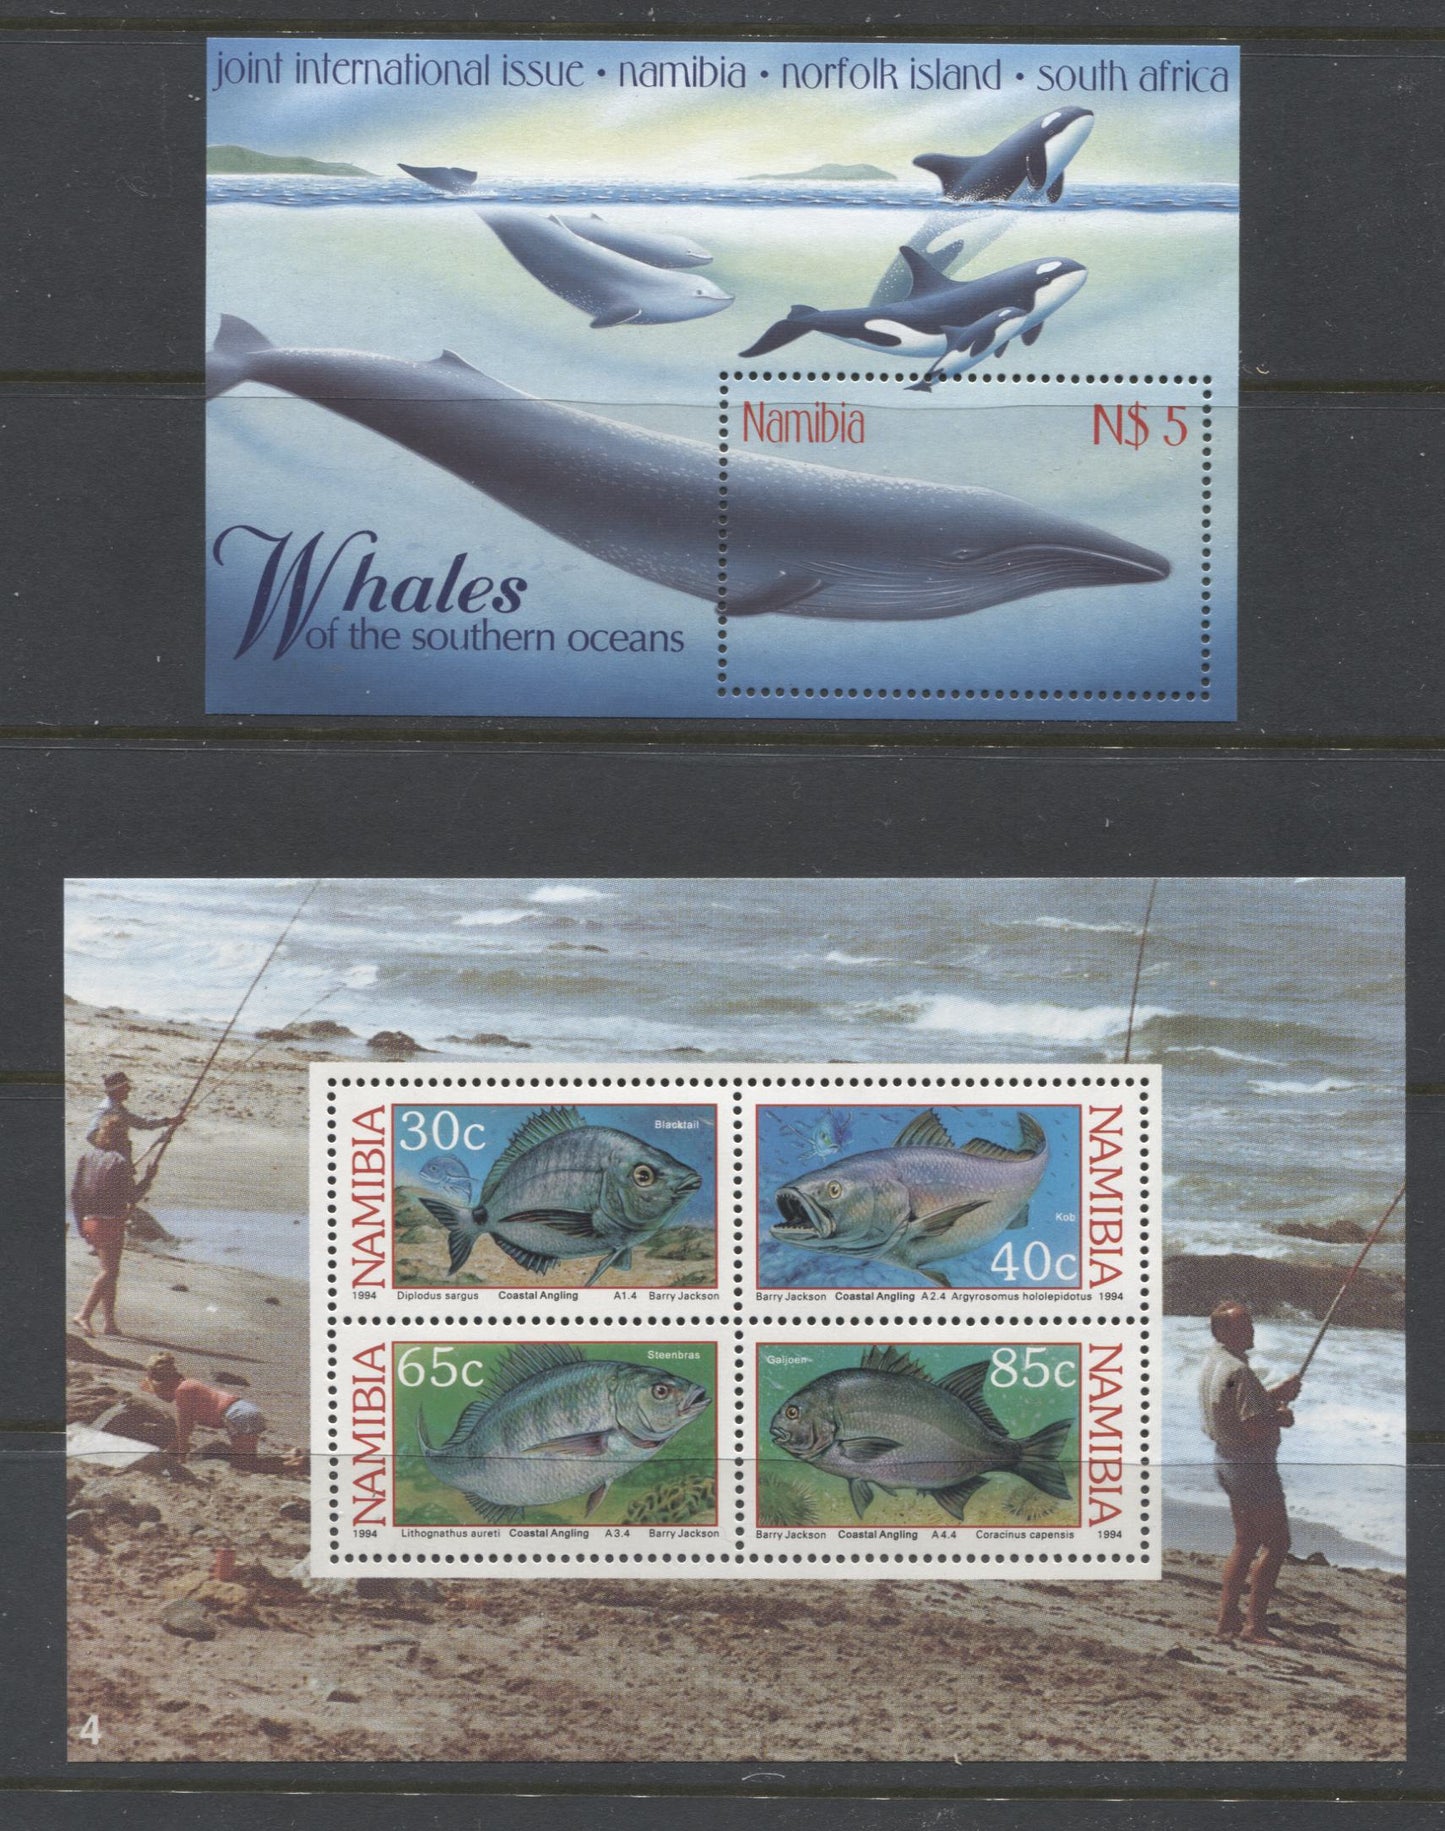 Lot 112 Namibia SC#710/919 1992-2006 Freshwater Fish - Dolphin Issues, 18 VFNH & OG Singles & Souvenir Sheets, Click on Listing to See ALL Pictures, 2017 Scott Cat. $18.15